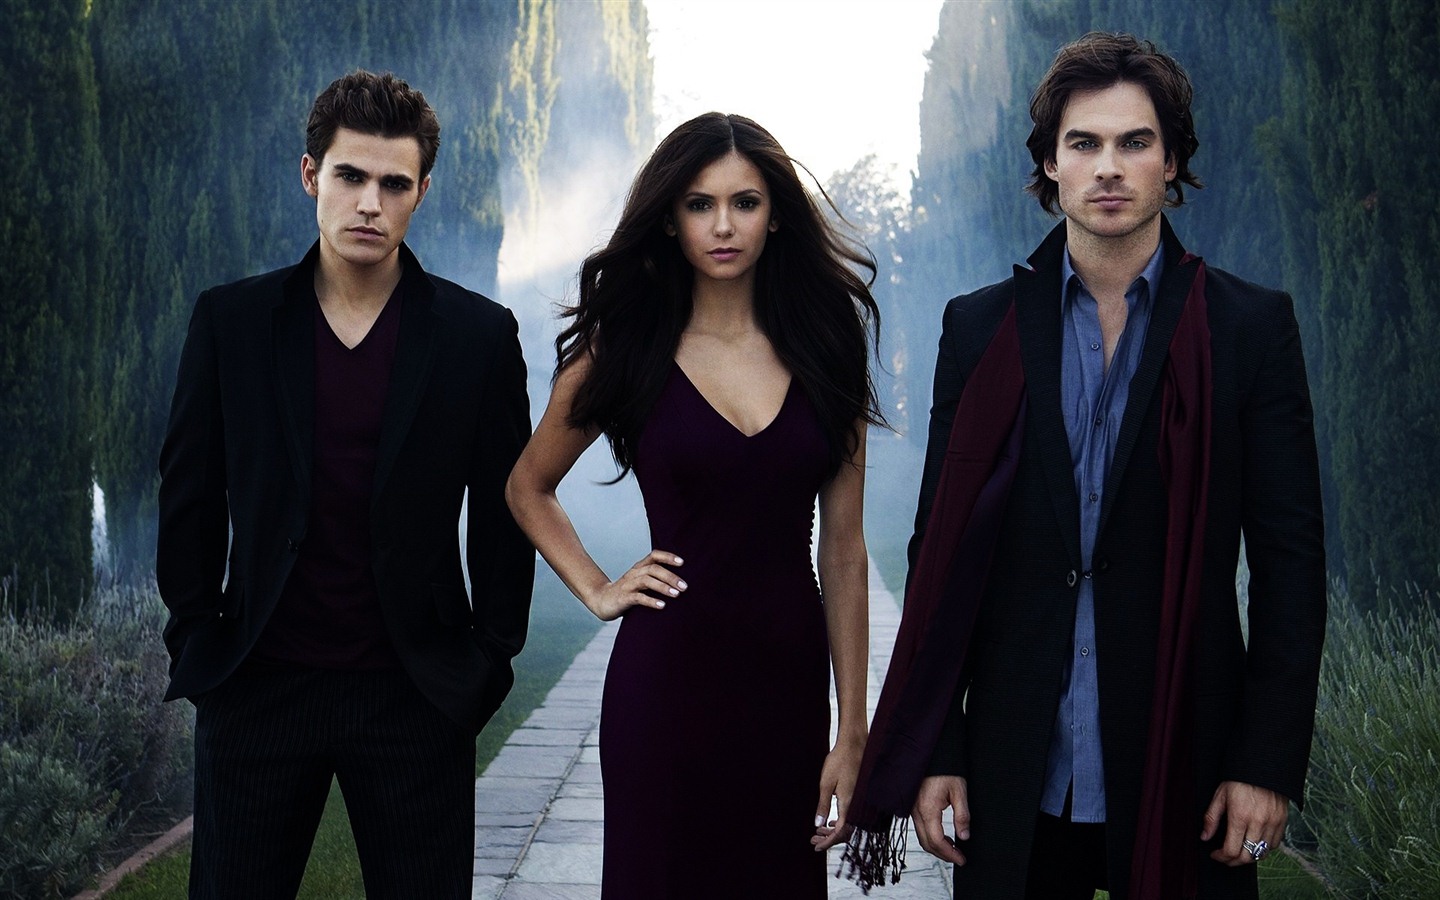 The Vampire Diaries wallpapers HD #6 - 1440x900